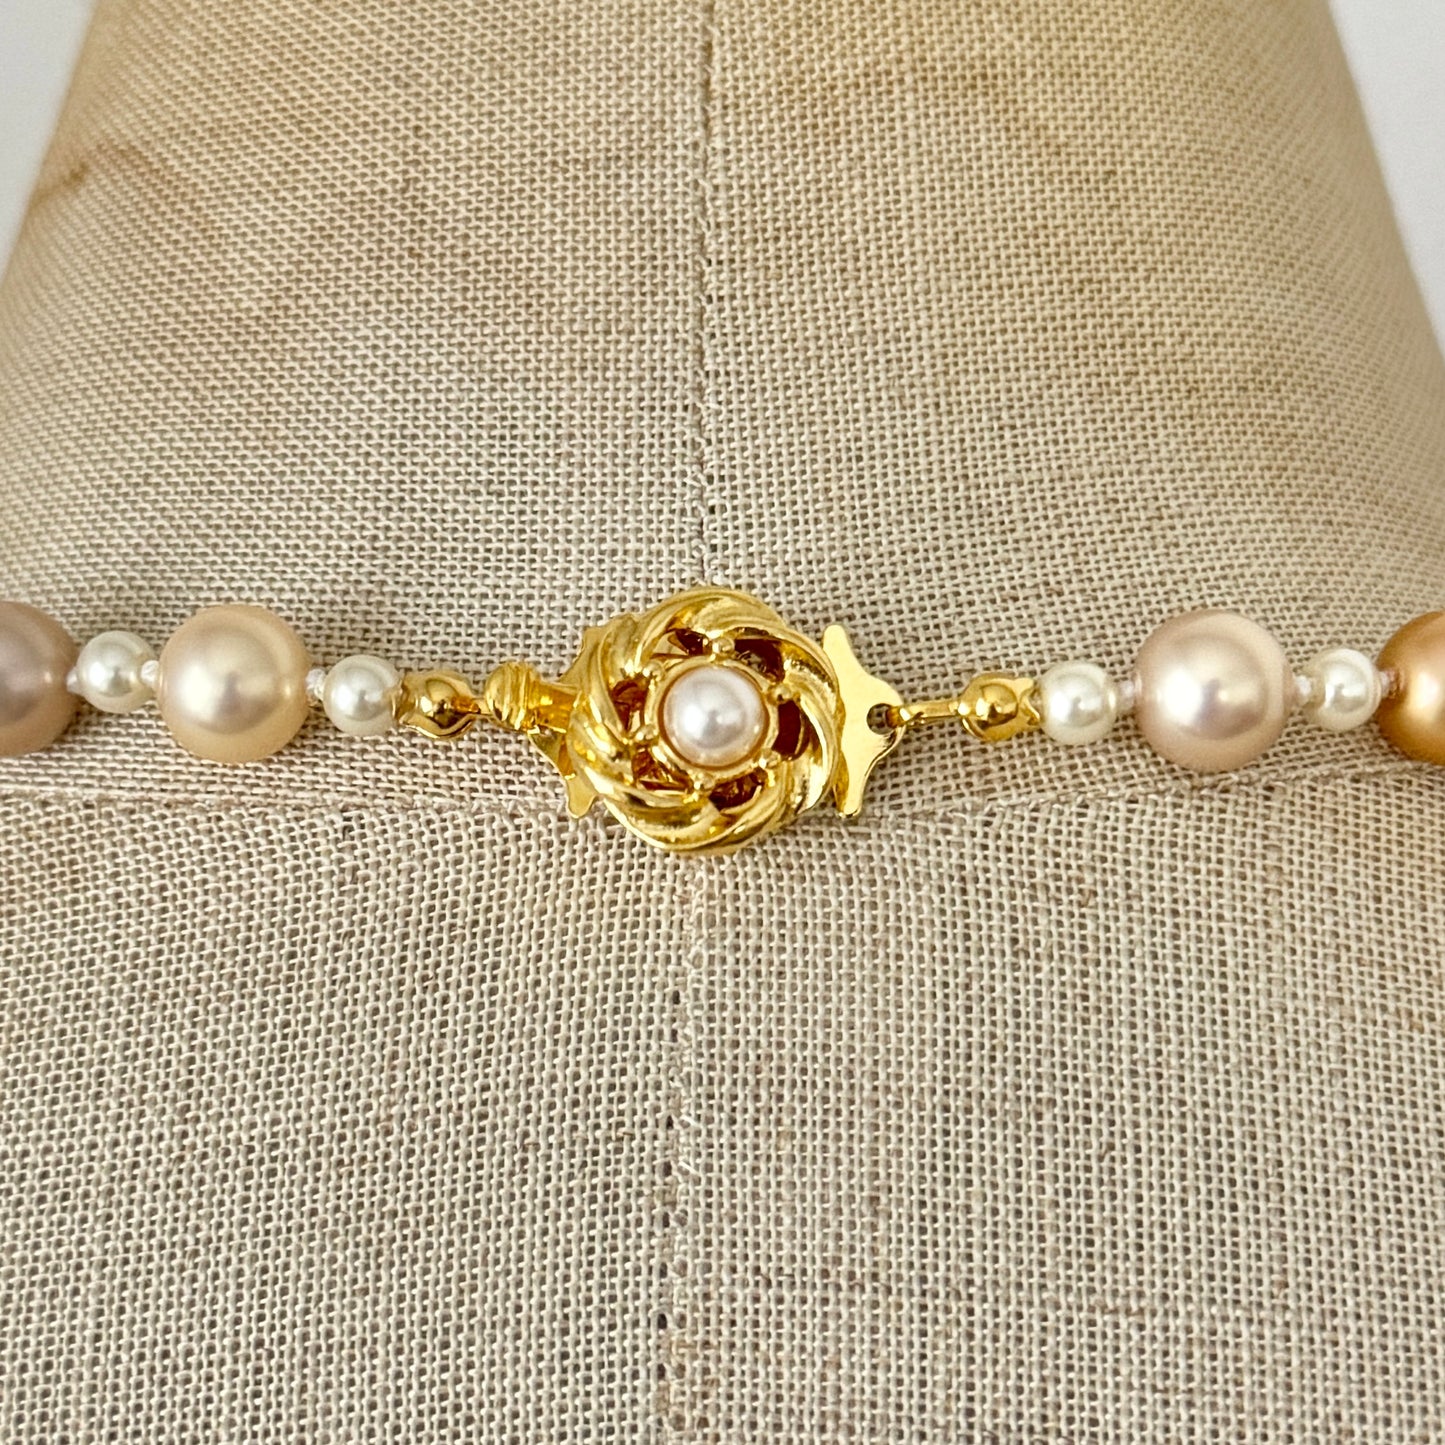 【Made in Japan 】Glass Pearl Necklace Cream/Beige mix Princess 42cm